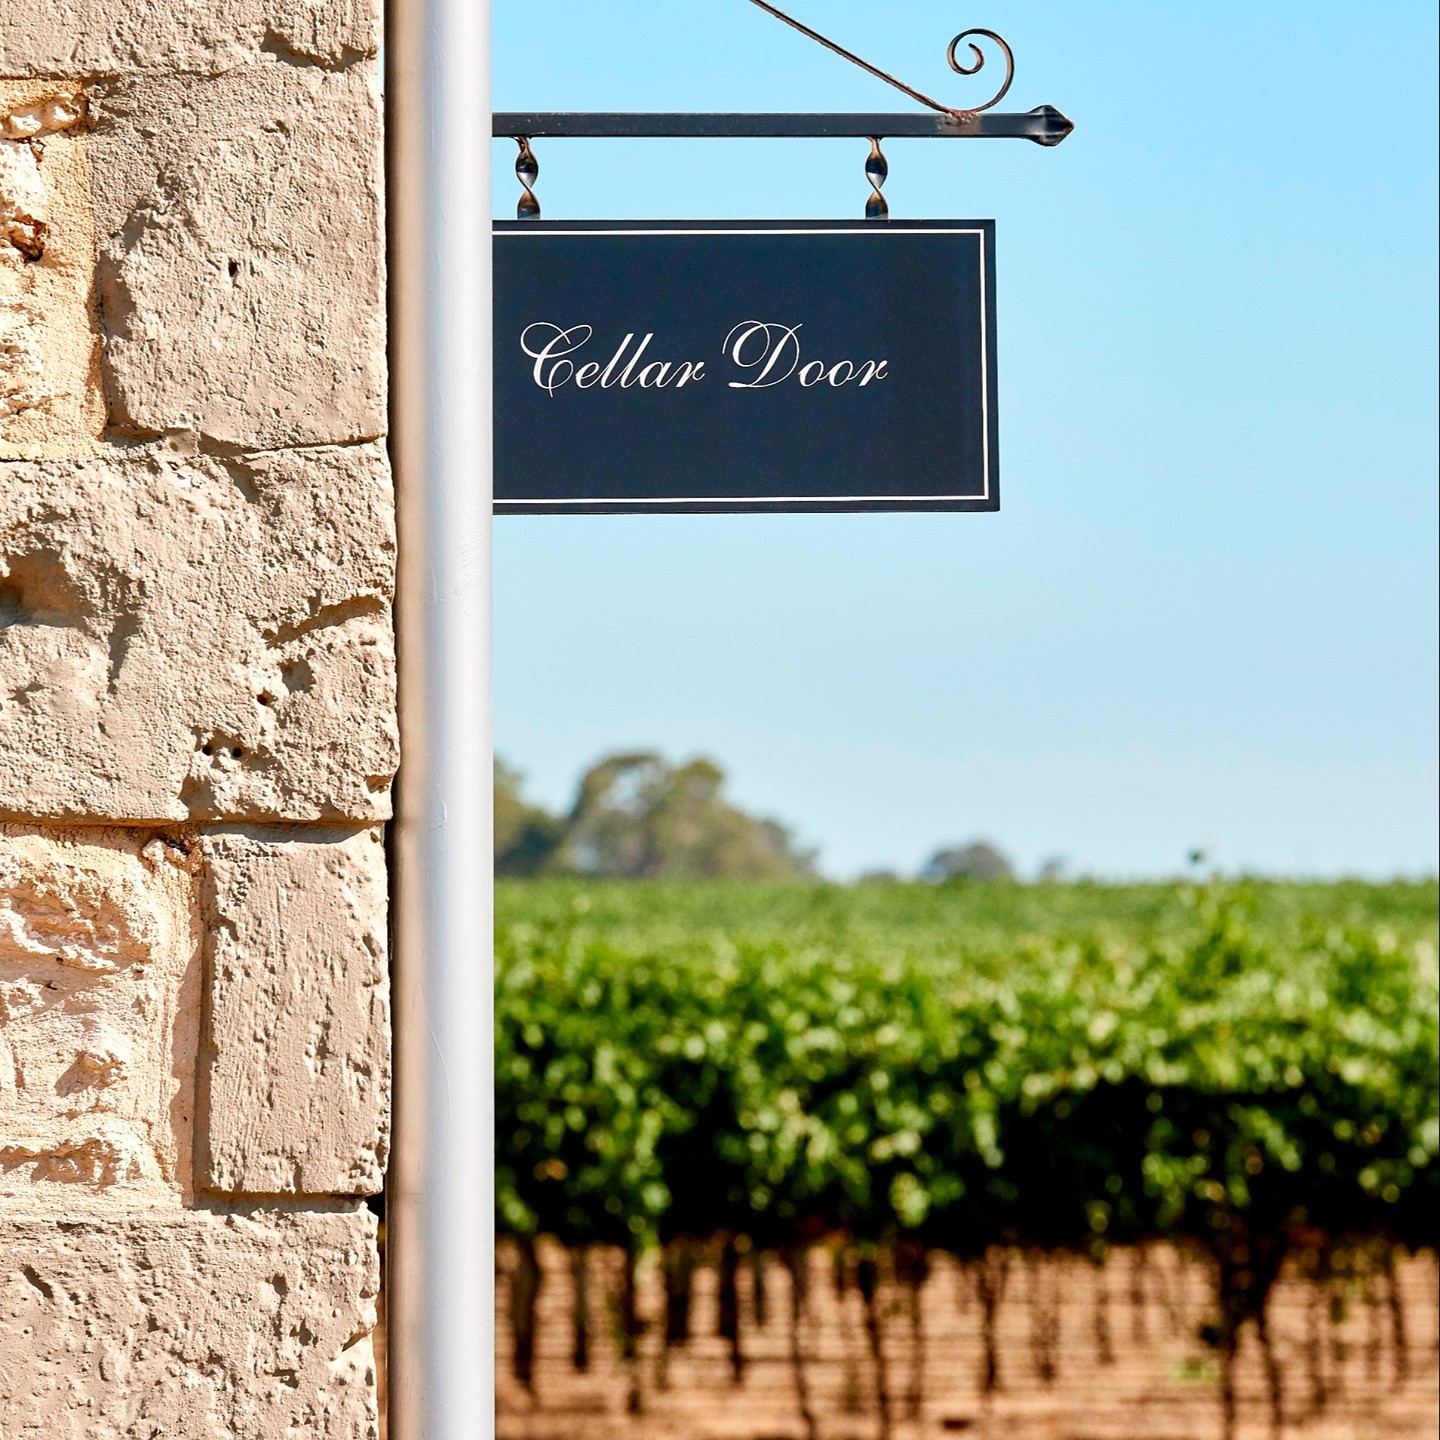 Things to do in robe coonawarra katnook estate